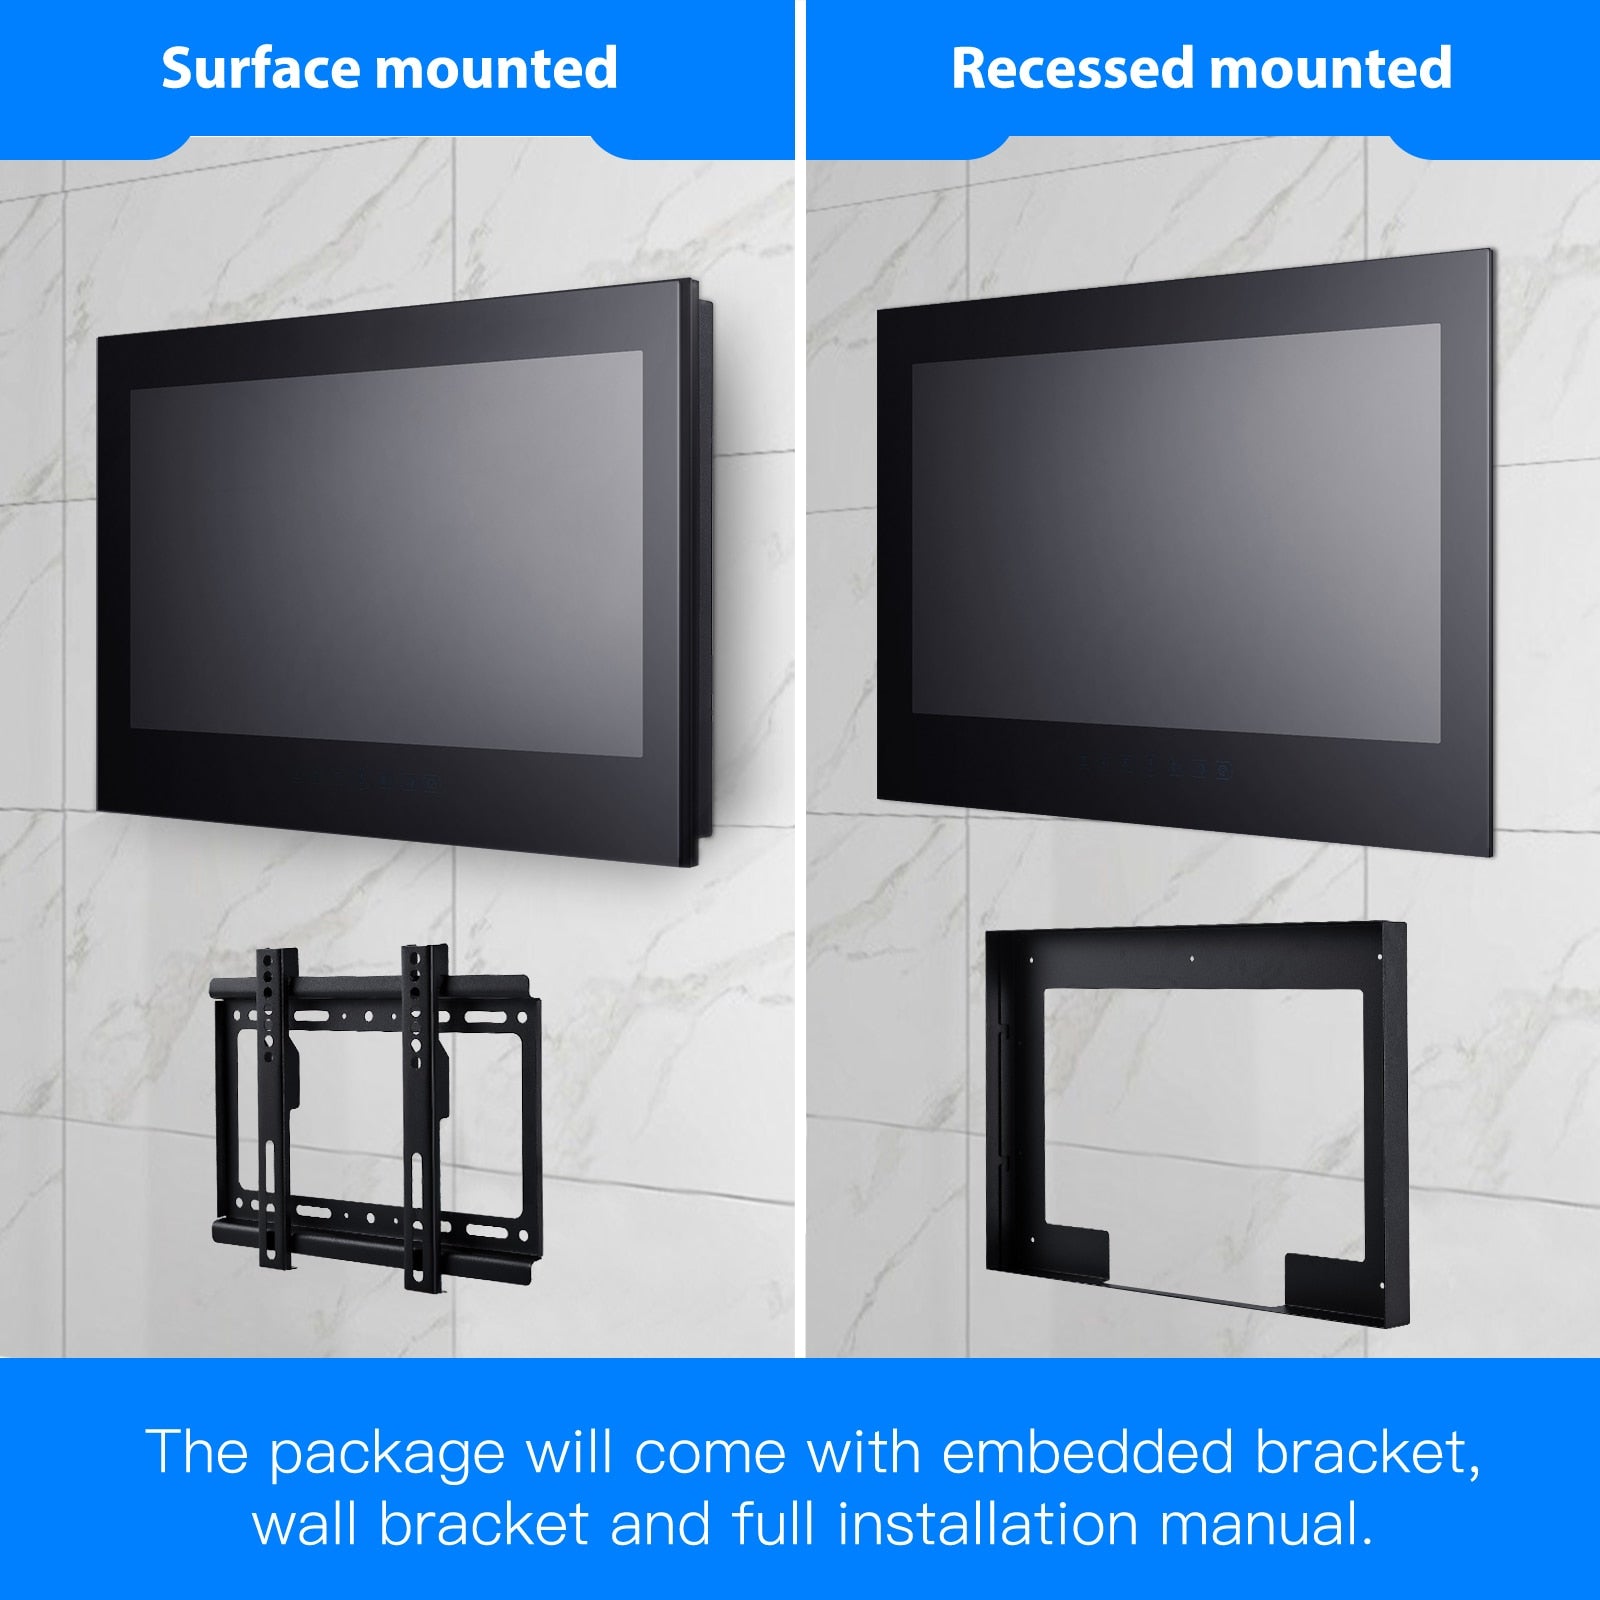 Haocrown 42 Inch Bathroom TV Black, IP66 Waterproof Television With Android 10.0 System Full HD 1080P Built-in Wi-Fi Bluetooth